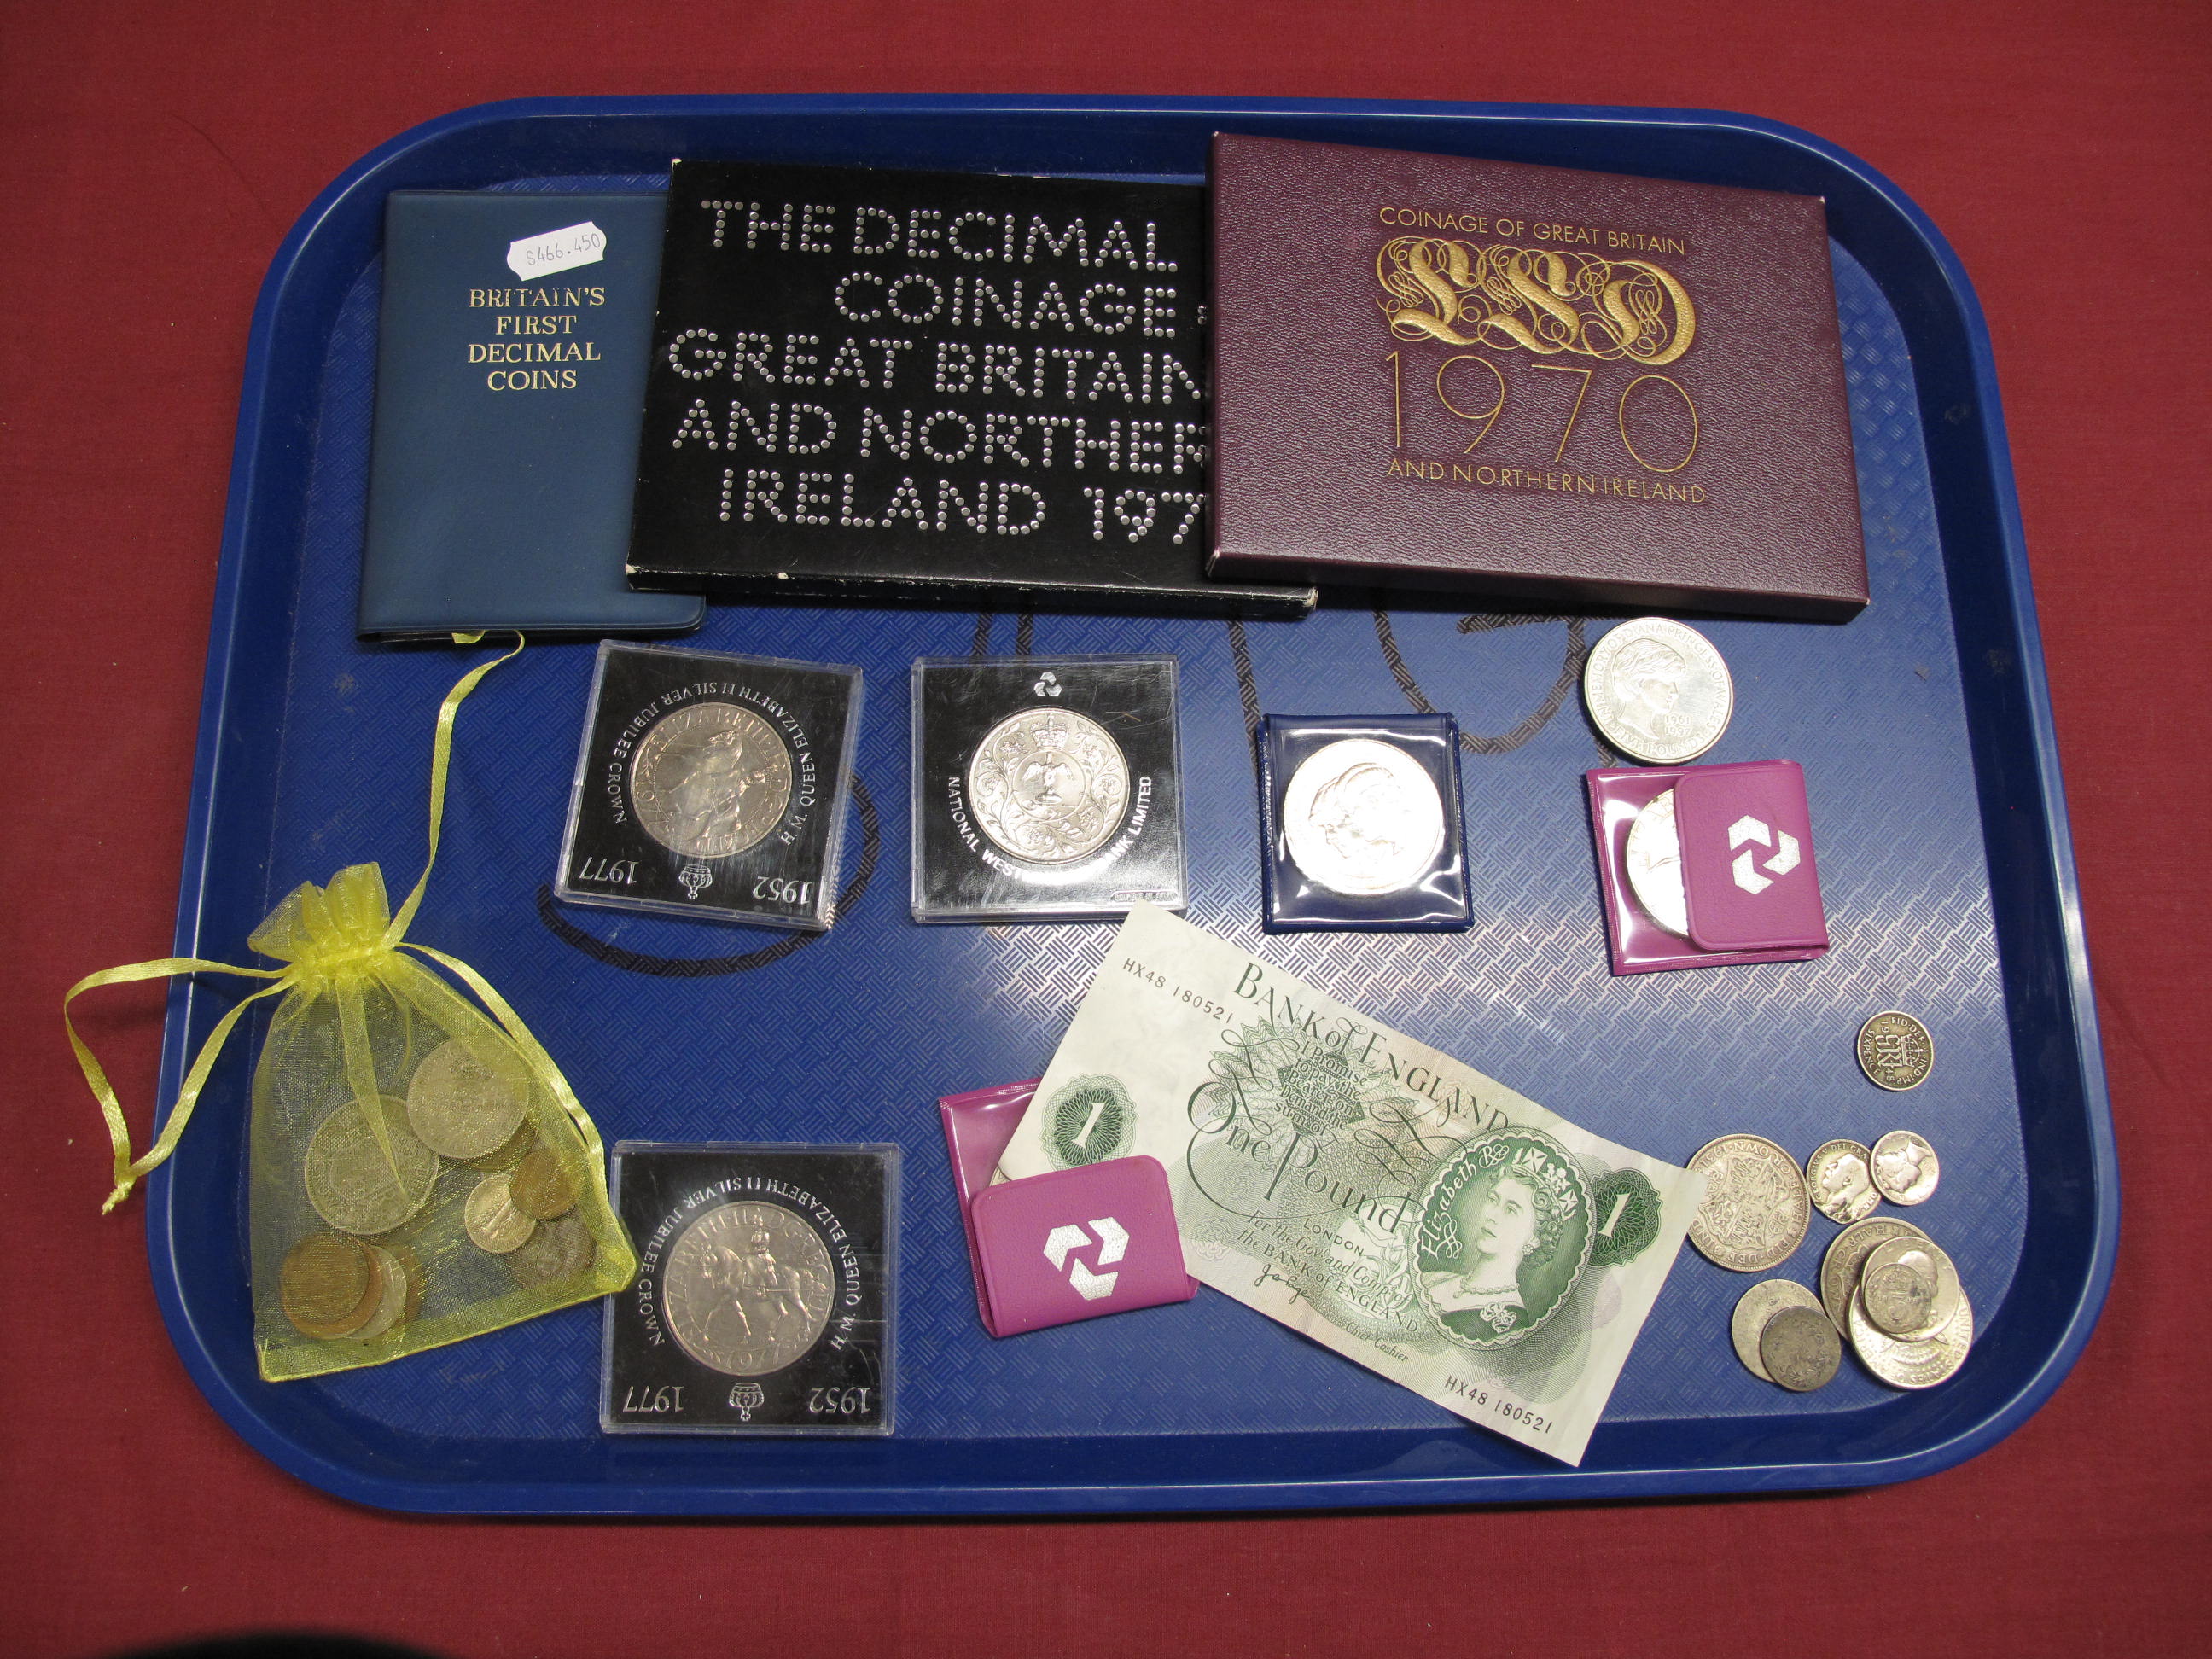 The Royal Mint G.B. Annual Coin Sets 1970, 1971 G.B. Commemorative Crowns, five pounds coin 1999